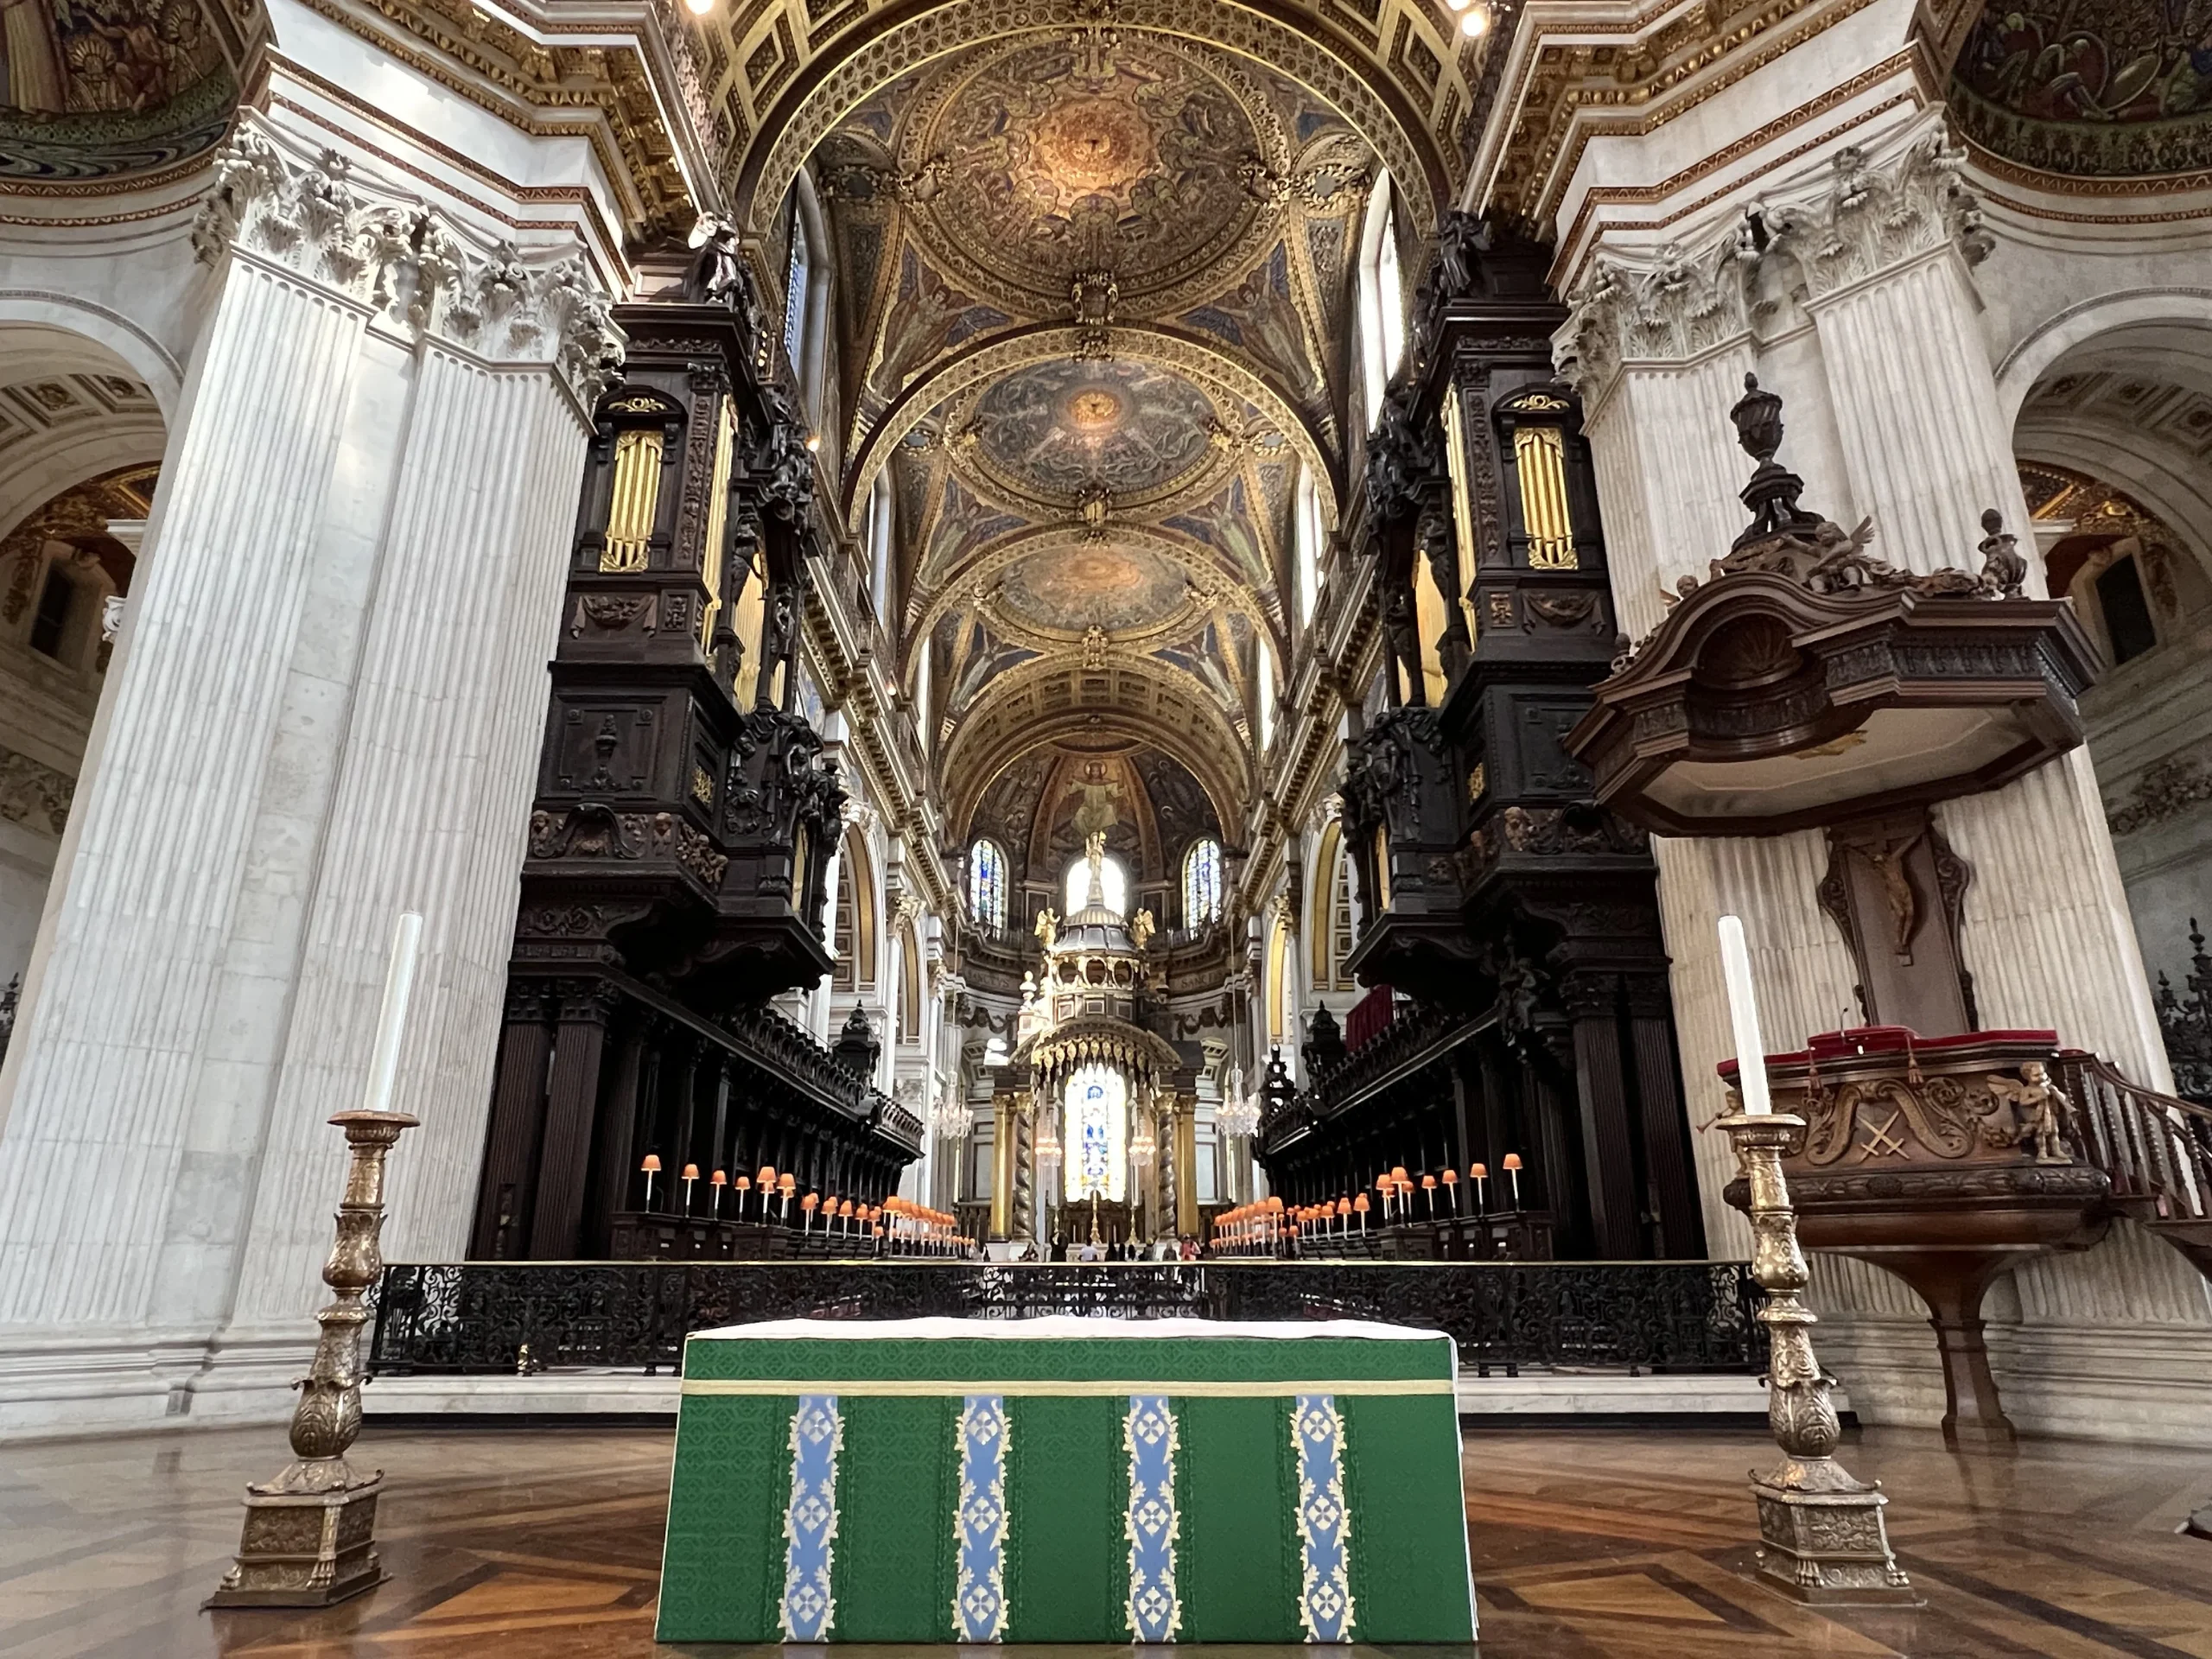 Dome Altar and The Quire